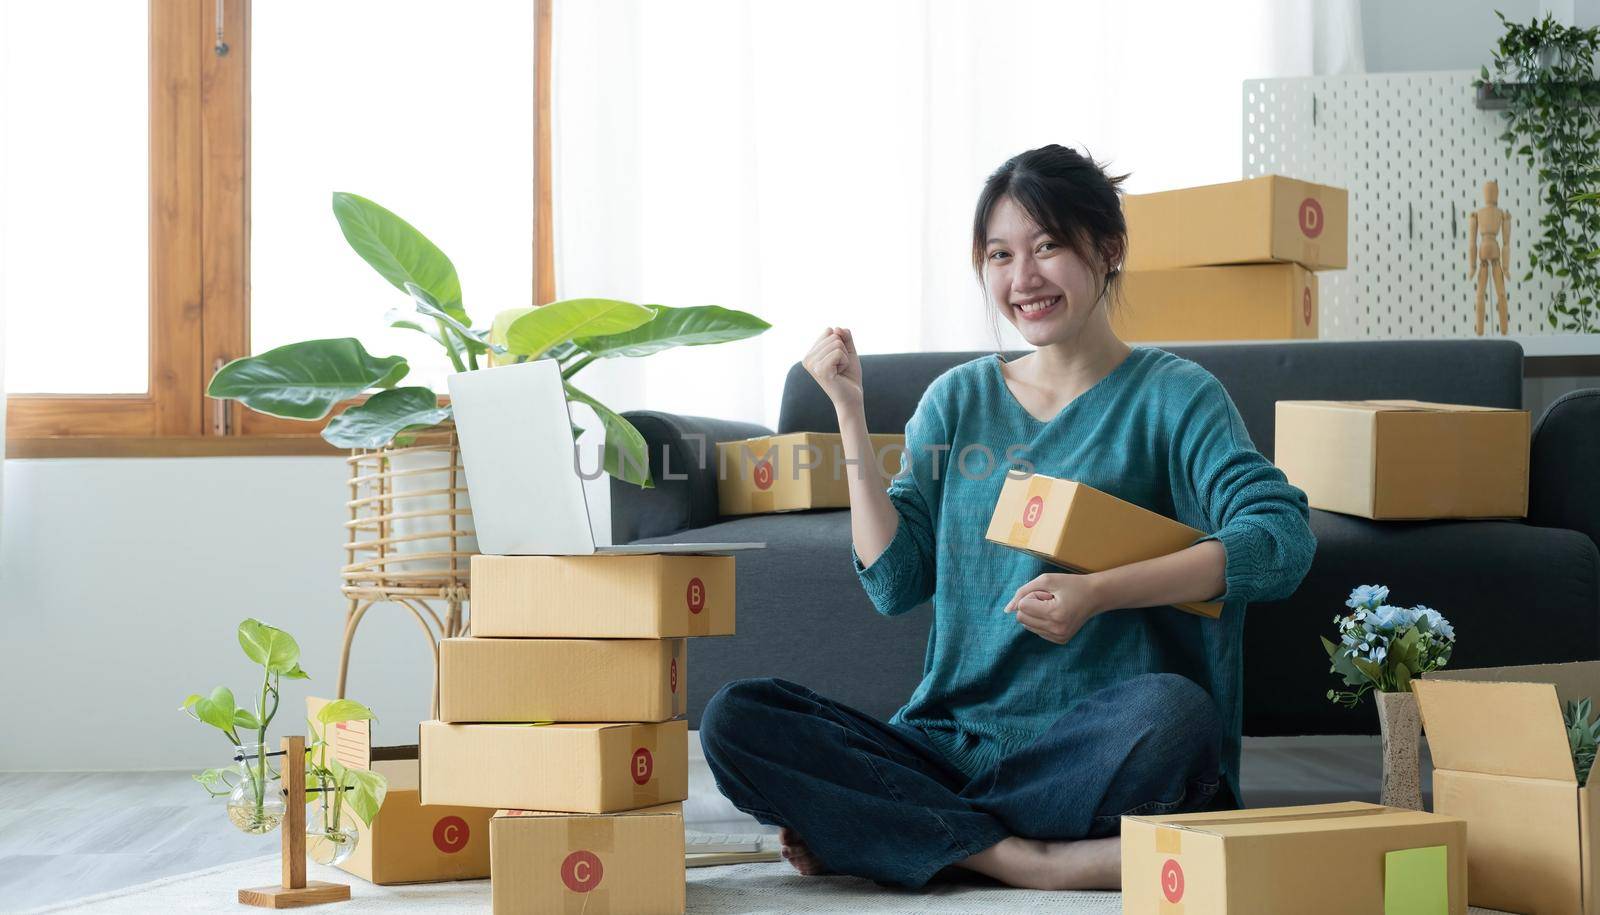 Portrait of Starting small businesses SME owners female entrepreneurs working on receipt box and check online orders to prepare to pack the boxes, sell to customers, SME business ideas online..